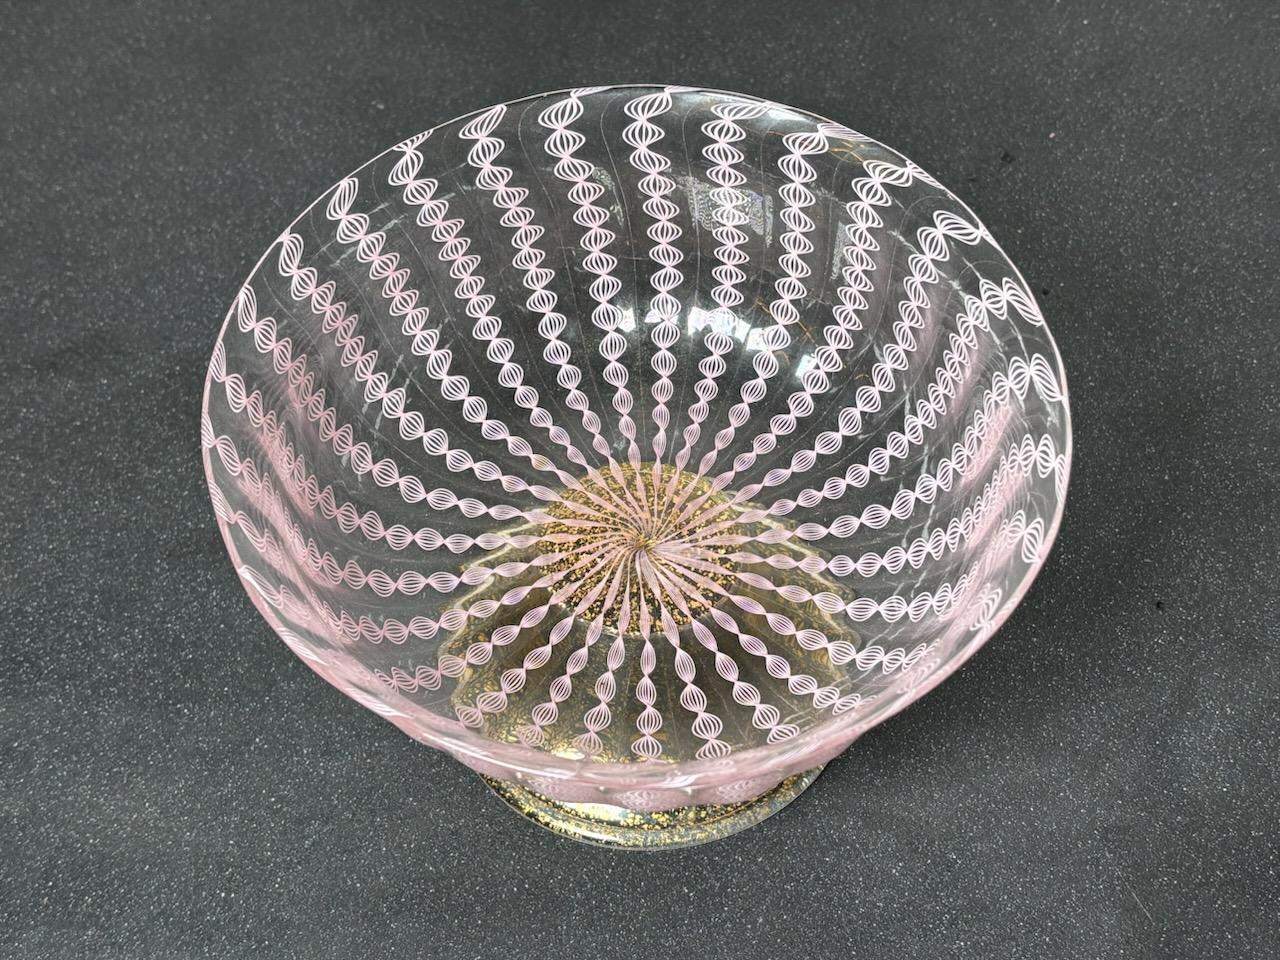 Murano Glass Centerpiece Cup by Paolo Venini. Signed under the base and with original label.

Biography
Paolo Venini was an Italian glass designer, important for his propagation of Murano glass and 20th-century glassware design. Born in 1895 in